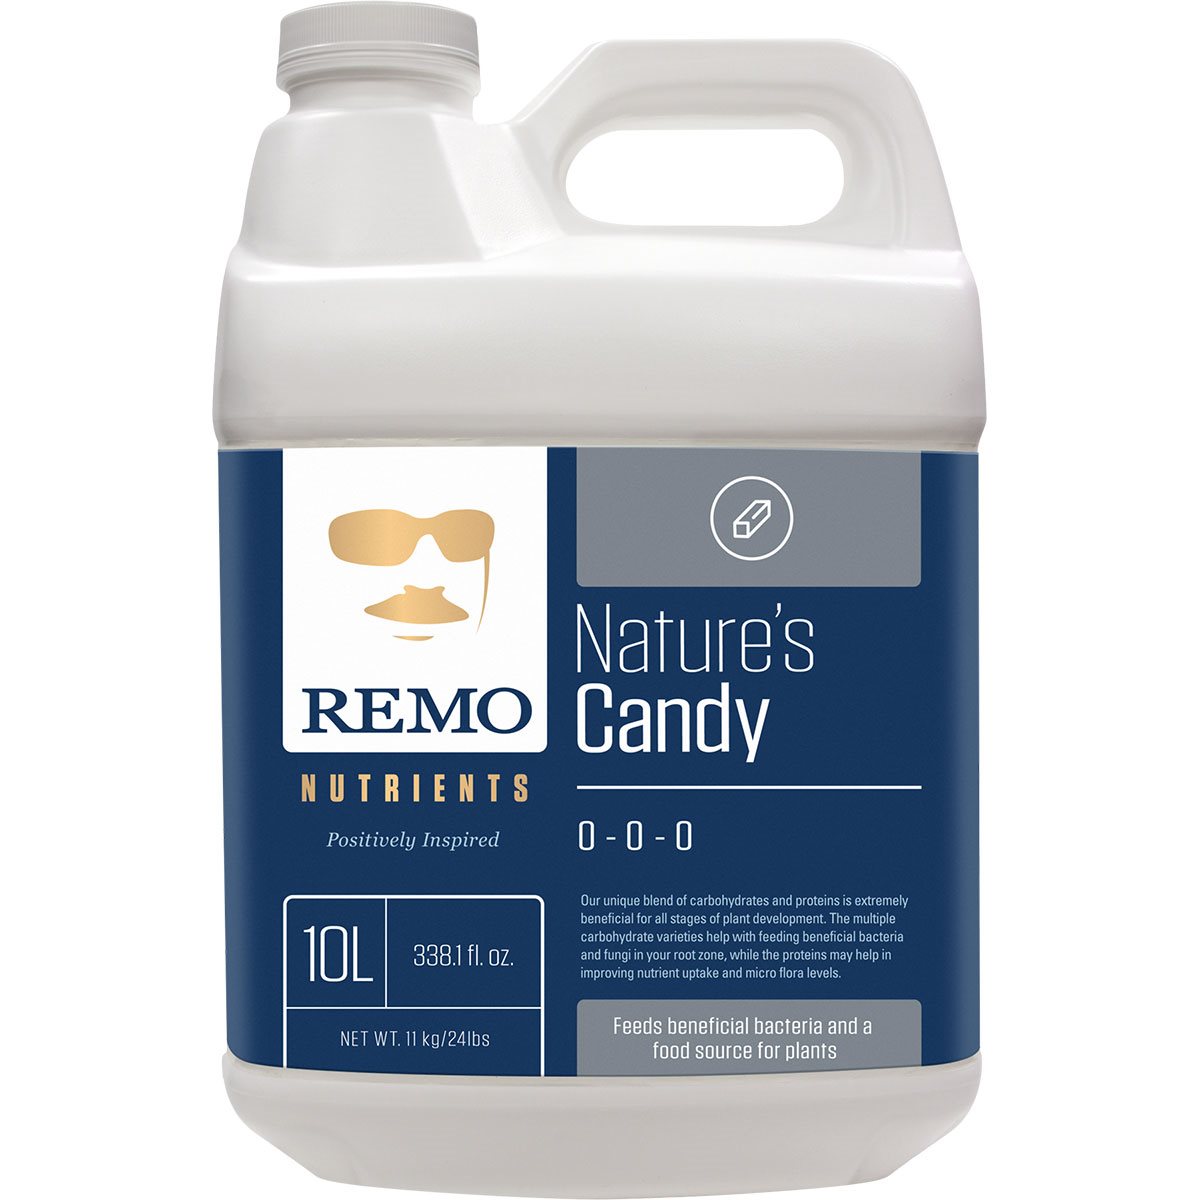 Remo Nature’s Candy 10 Liter